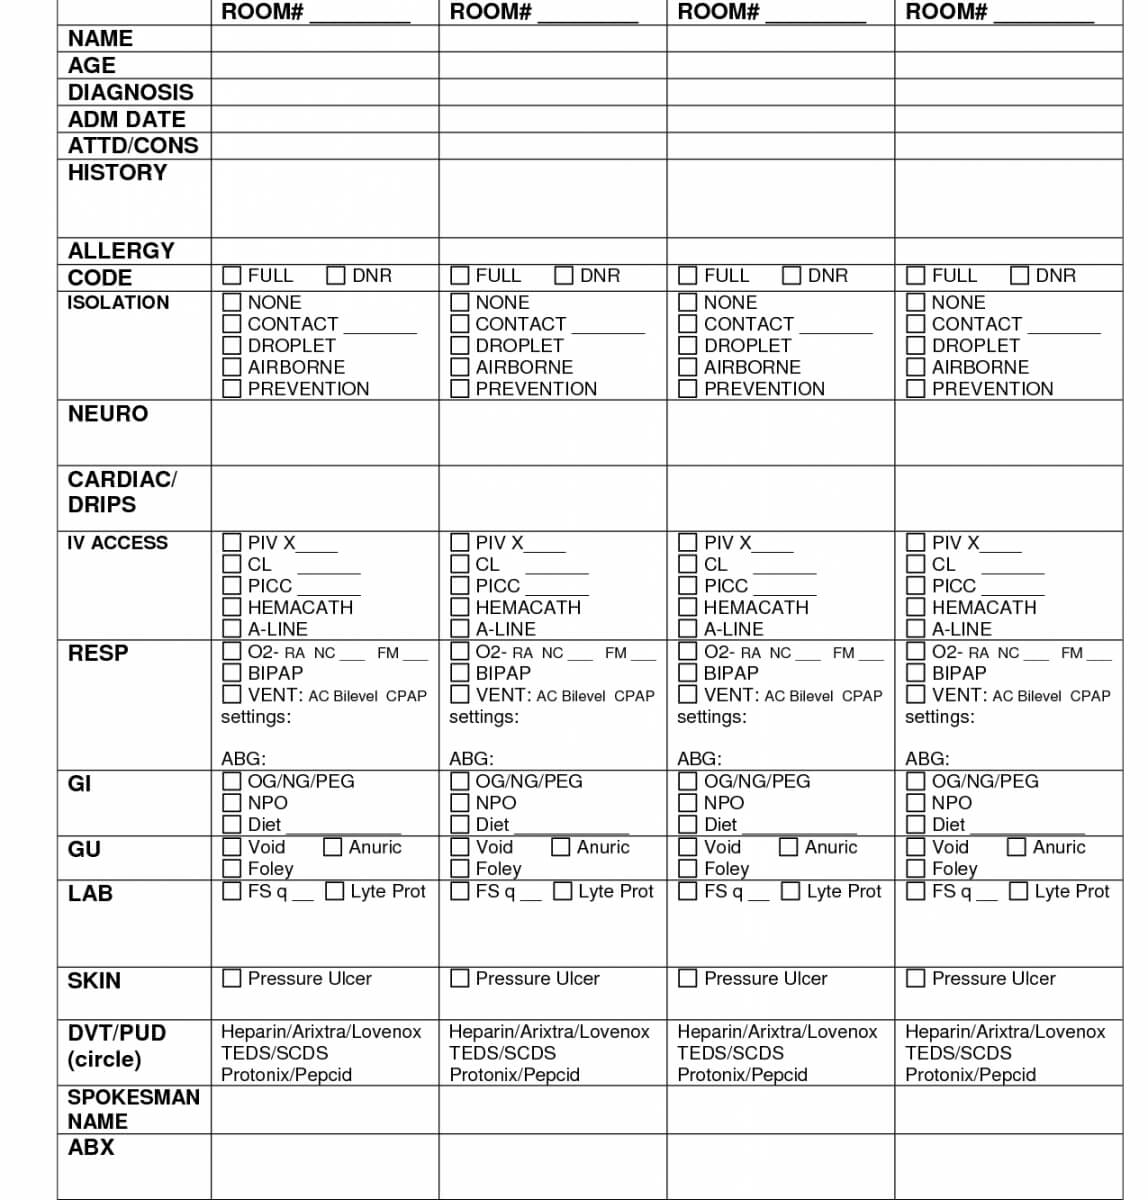 printable-charge-nurse-report-sheet-sample-nursing-documents-intended-for-nurse-report-template